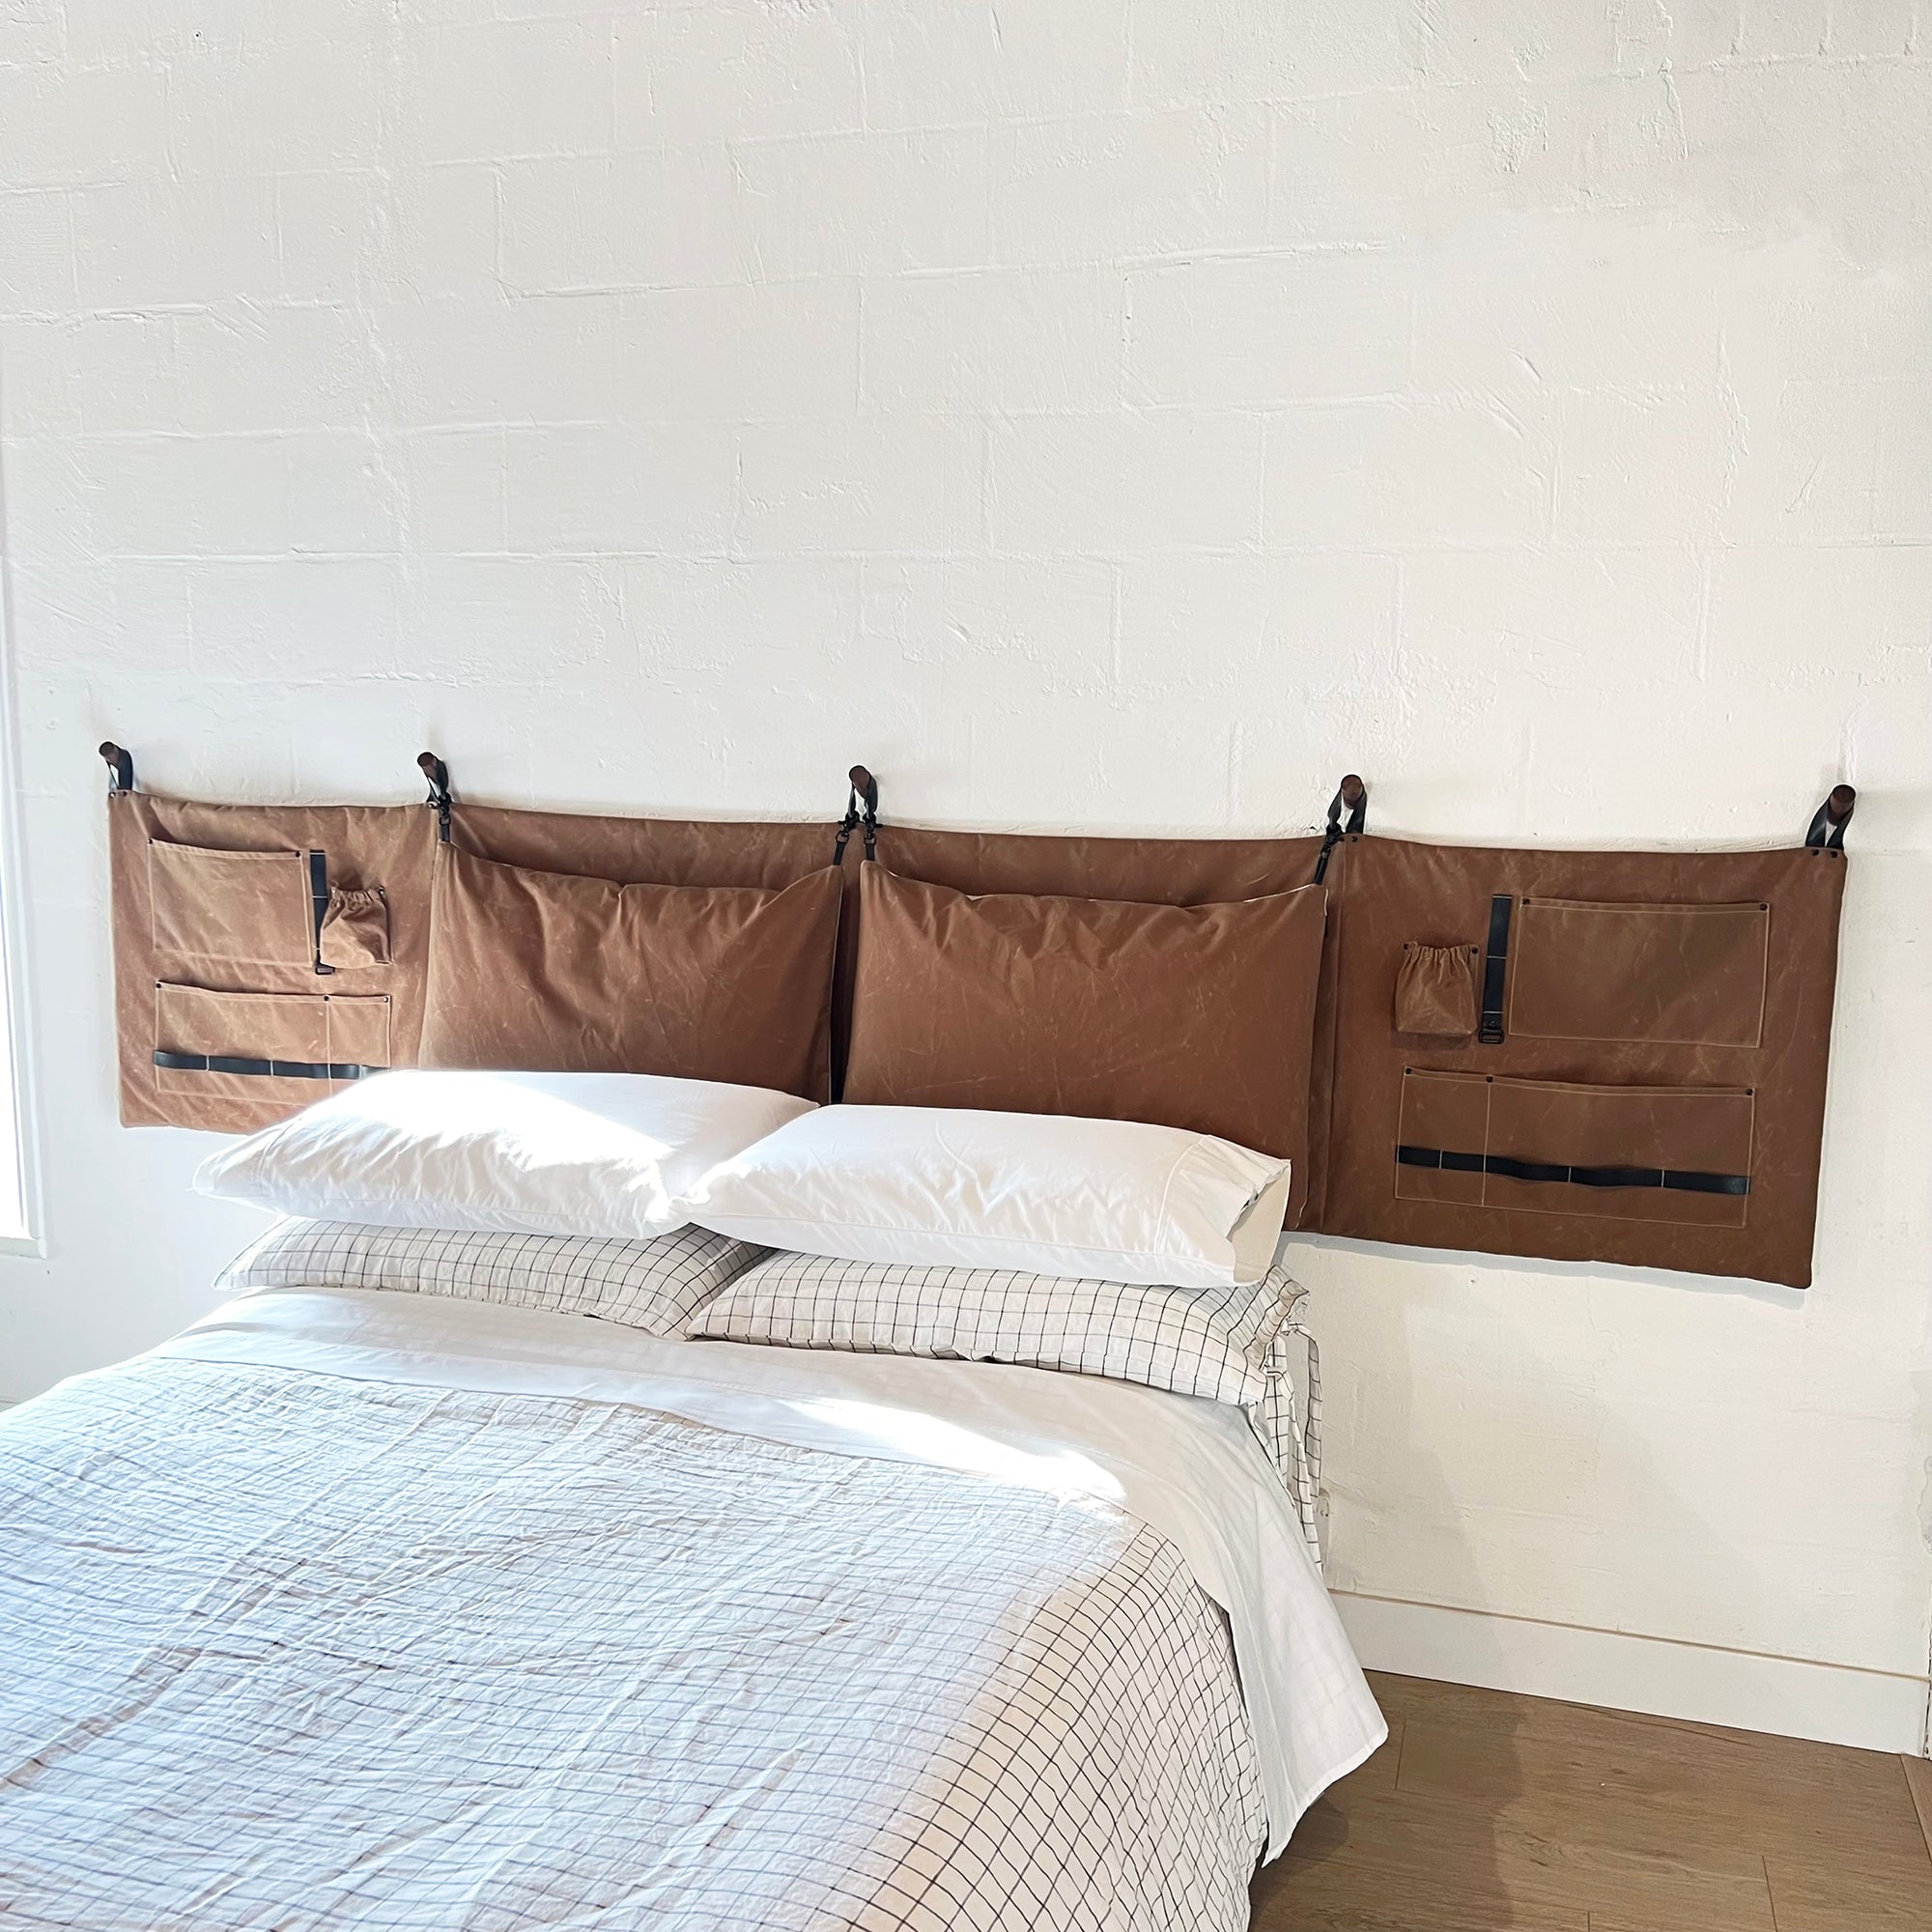 Rugged, camping inspired brown waxed cotton canvas headboard with pockets on the side panels for all your storage needs and matching canvas pillows attached. The headboard is hanging on a white wall over a platform bed with linen bedding.